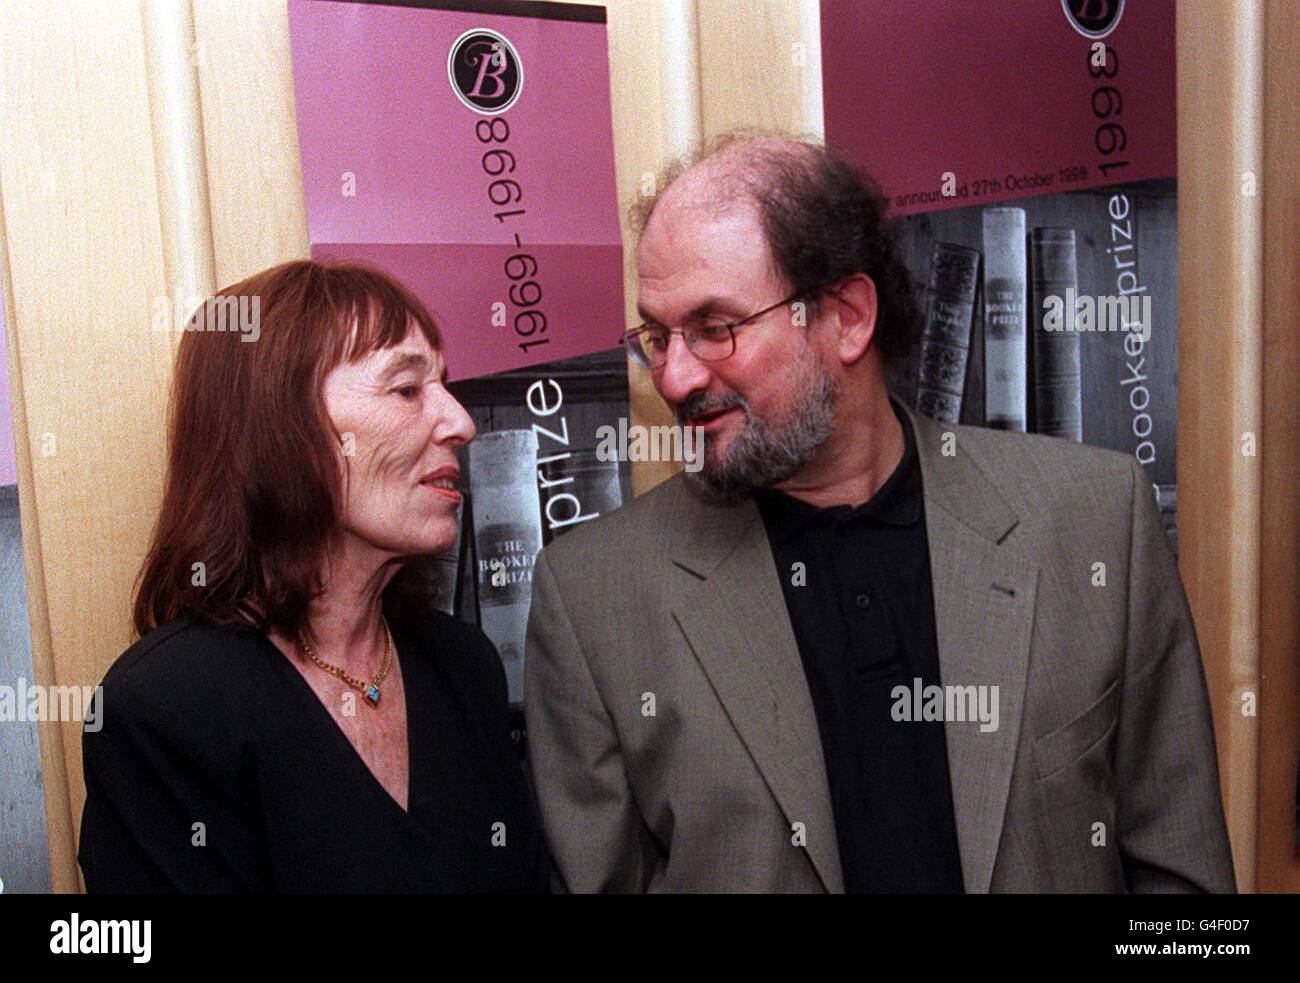 Authors Beryl Bainbridge (left) and Salman Rushdie (right) at the British Library in London today (Tuesday) to help mark the thirtieth anniversary of The Booker Prize for Fiction with an evening of readings and debate. Authors Victoria Glendinning, Salman Rushdie, Kazuso Ishiguro, Roddy Doyle, Beryl Bainbridge and Nicholas Moseley were joined by members of the public for the unique literary event. Photo by Stefan Rousseau/PA. Stock Photo